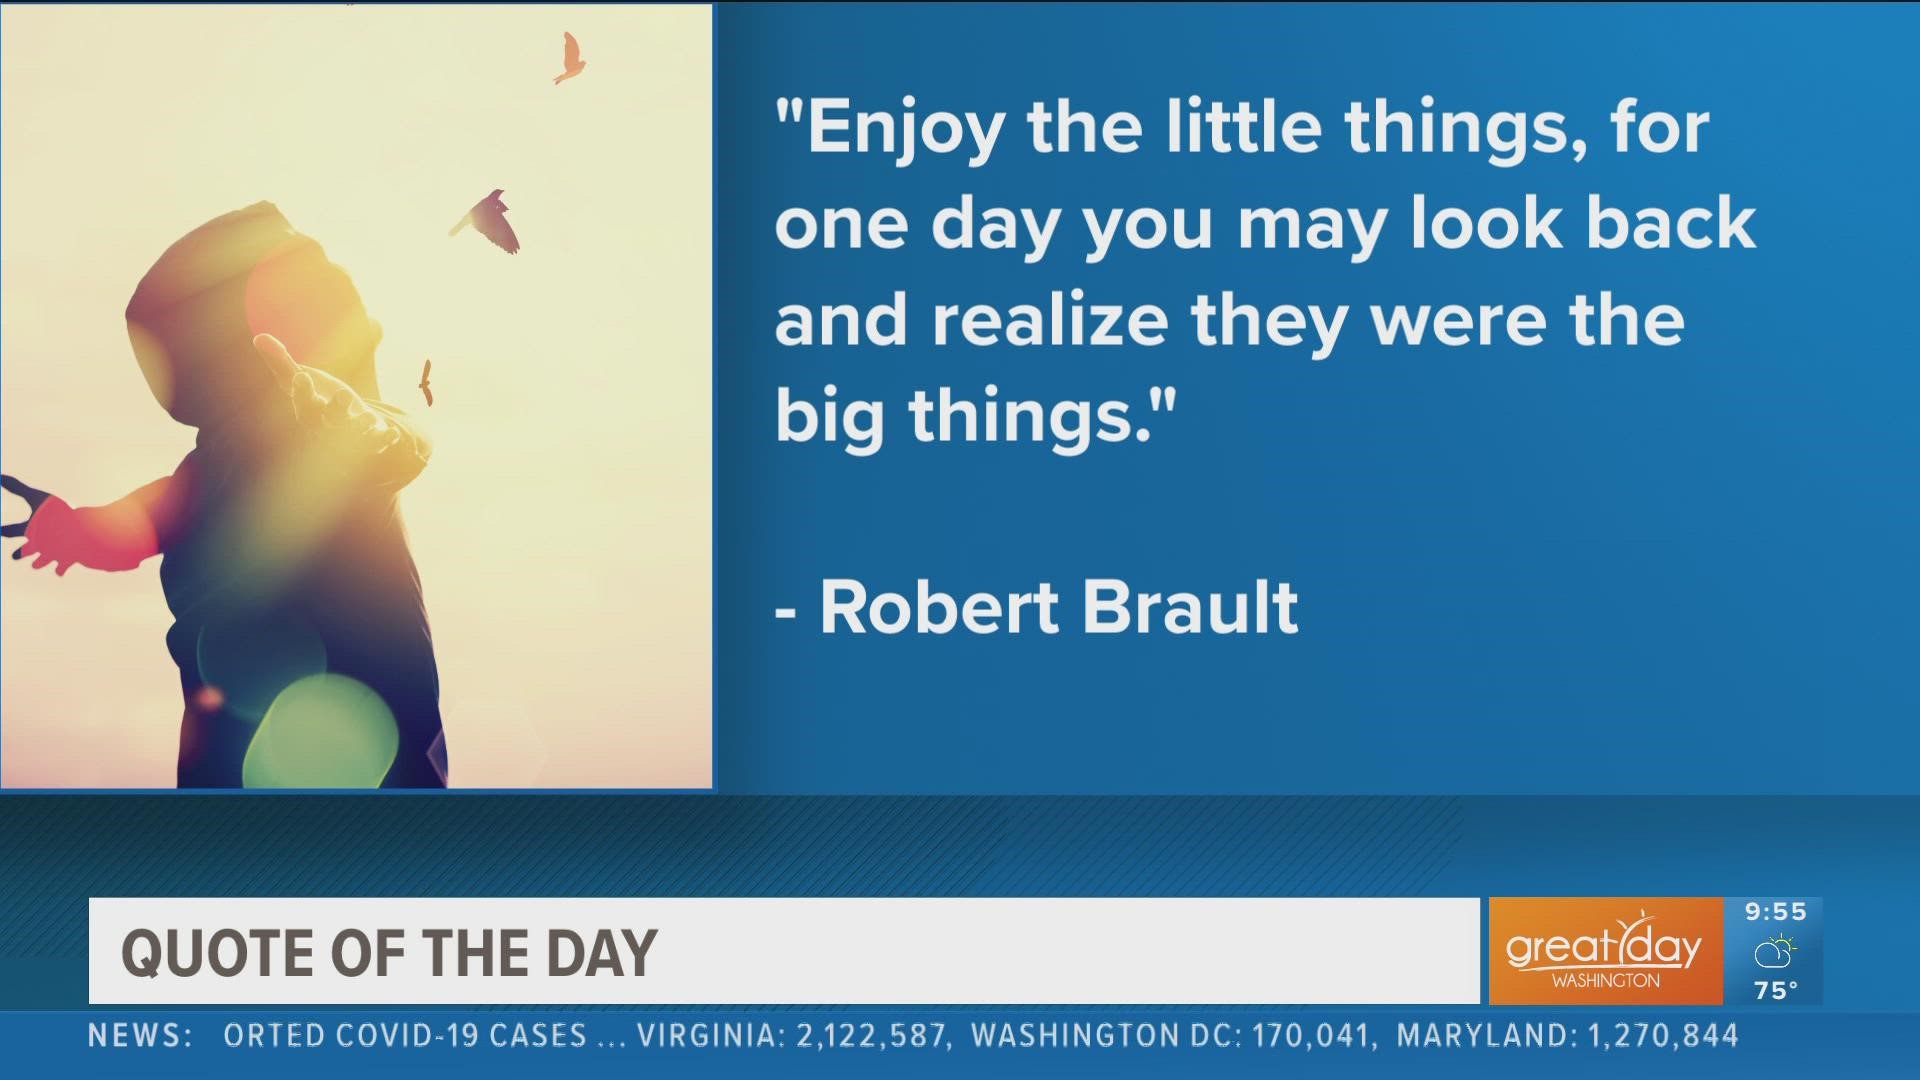 Ellen pulls inspiration to start the week with a quote from Robert Brault with November being the "Month of Gratitude".